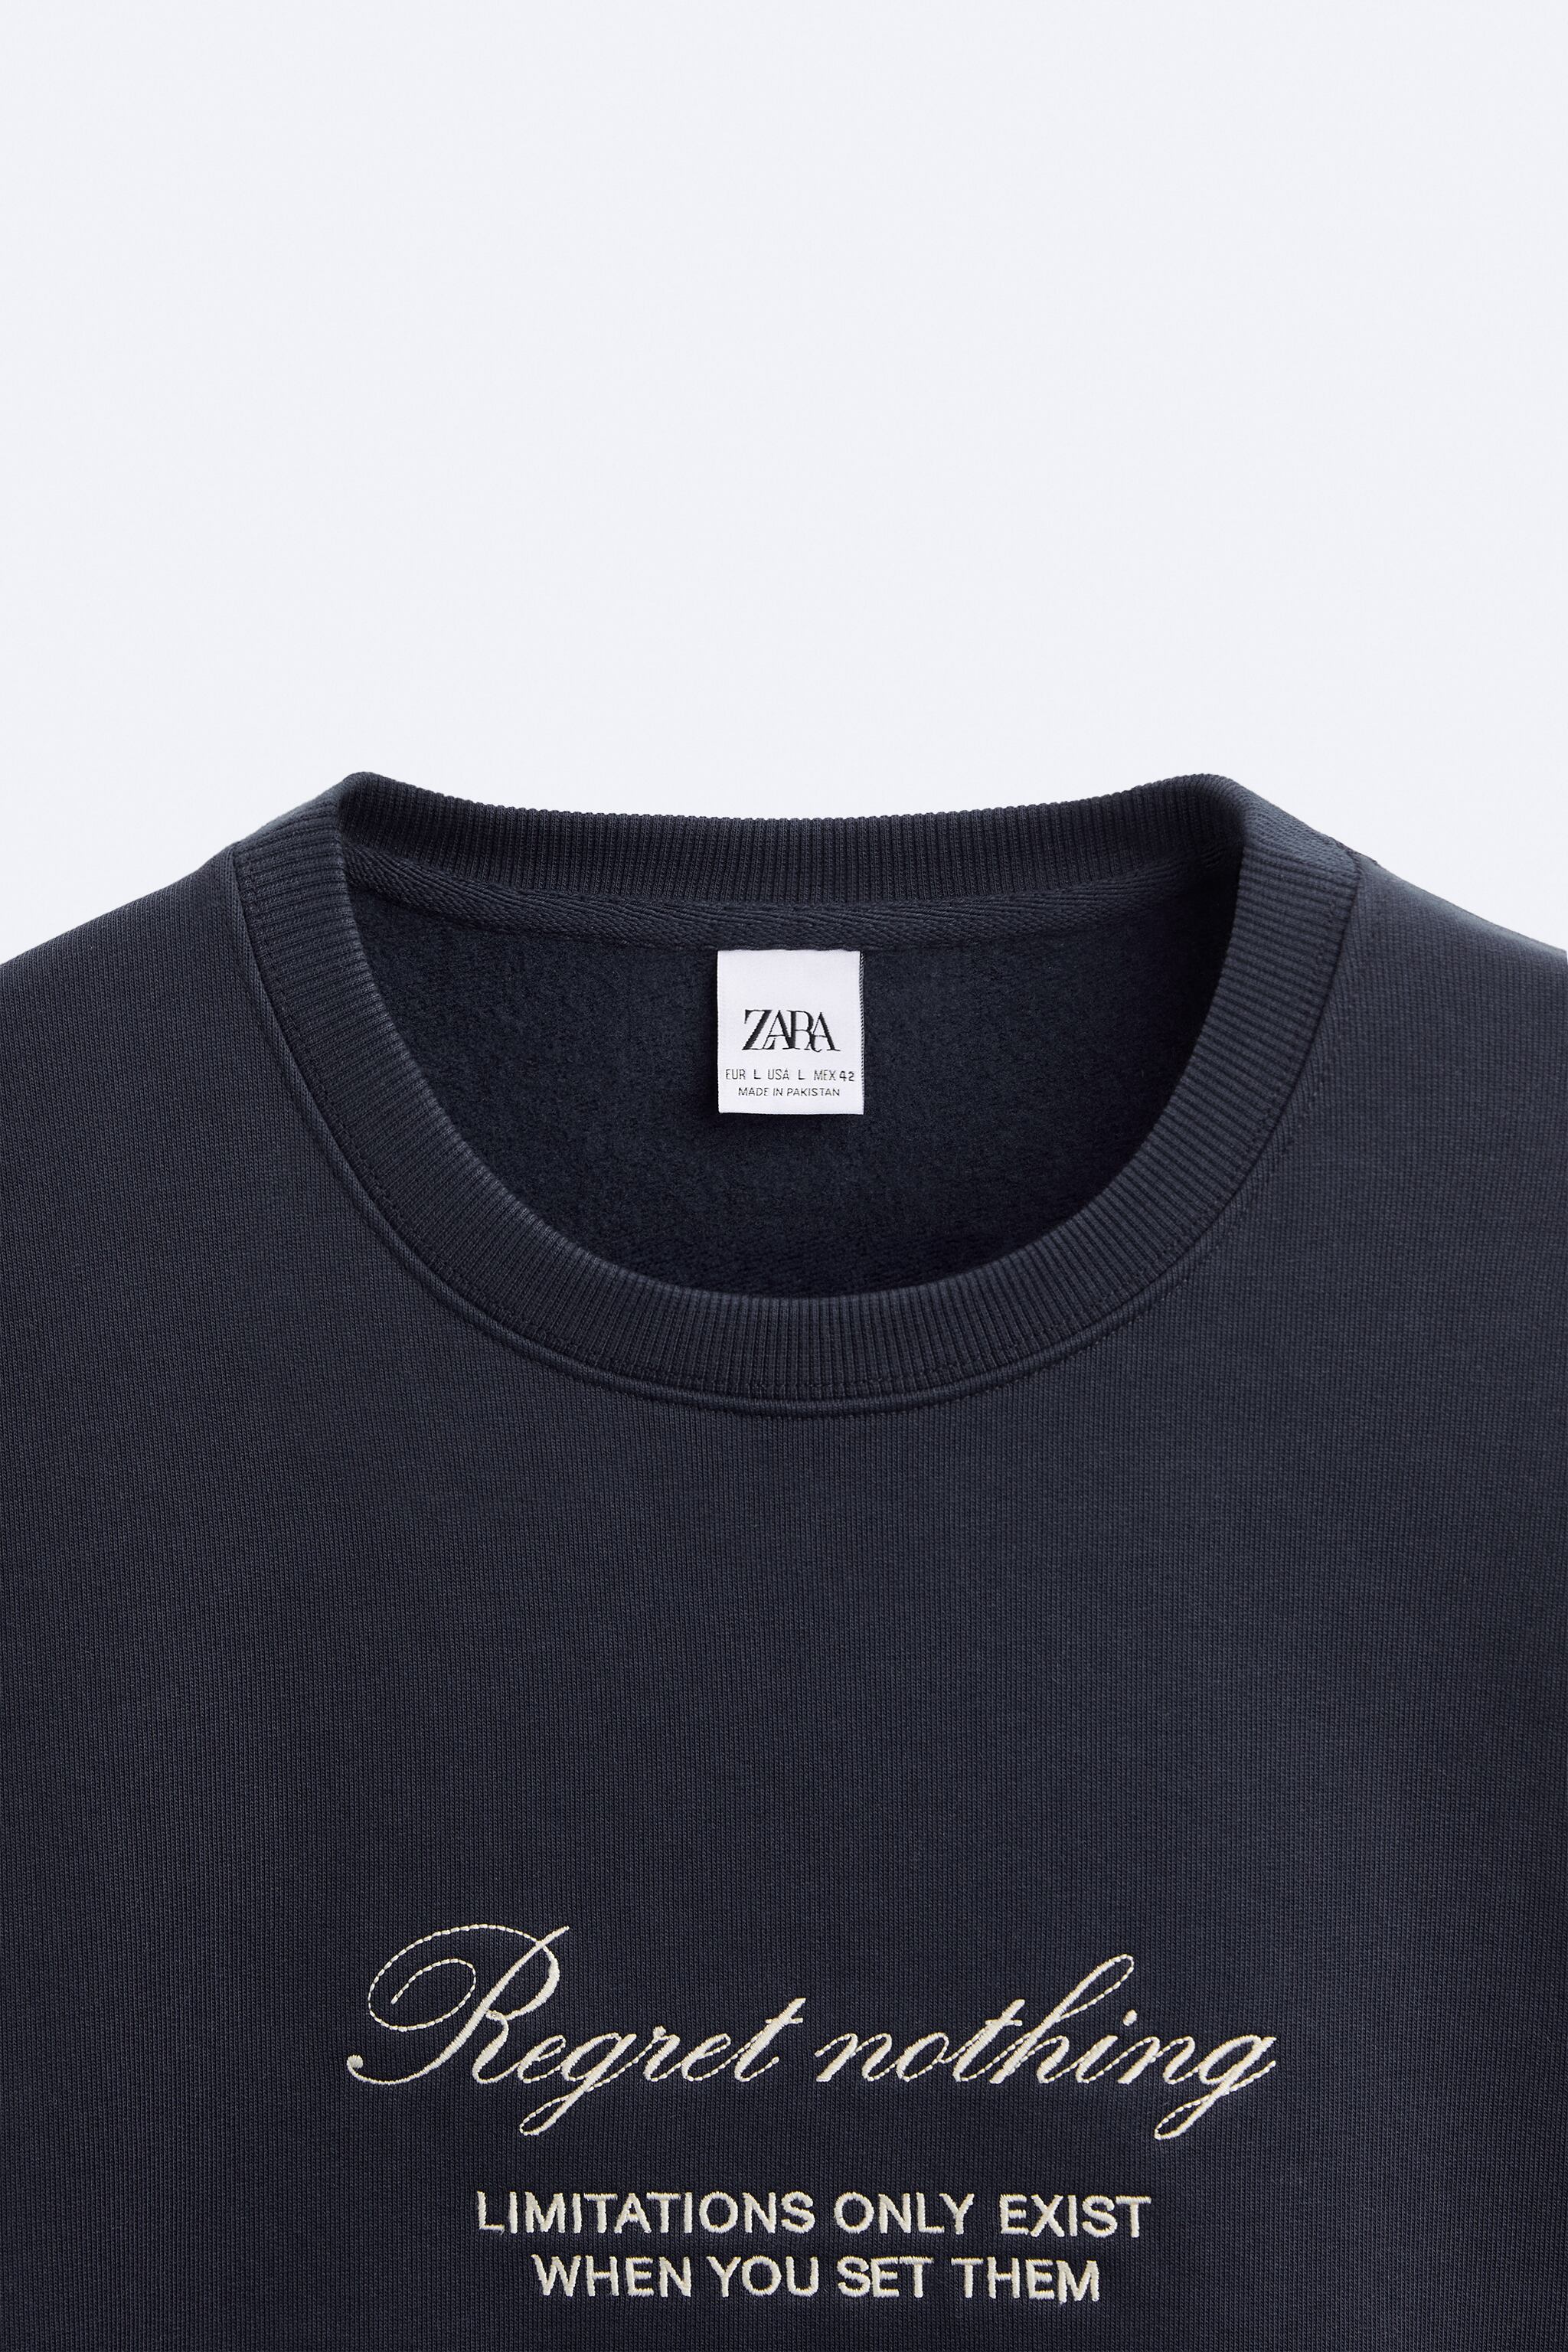 SWEATSHIRT WITH CONTRASTING EMBROIDERY